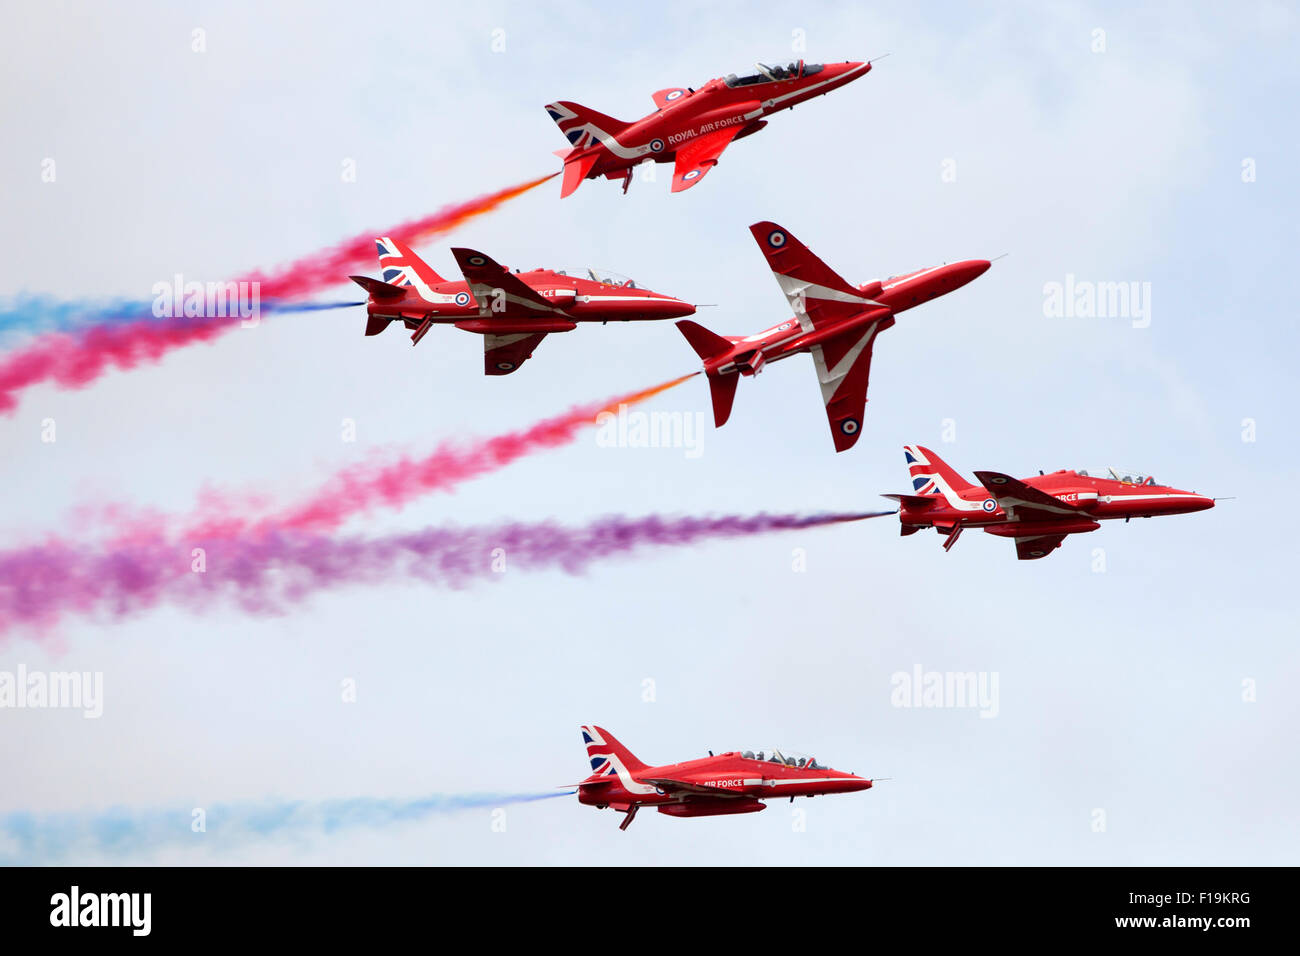 The Red Arrows known as the Royal Air Force Aerobatic Team the aerobatics display team of the Royal Air Force at RIAT 2015 Stock Photo